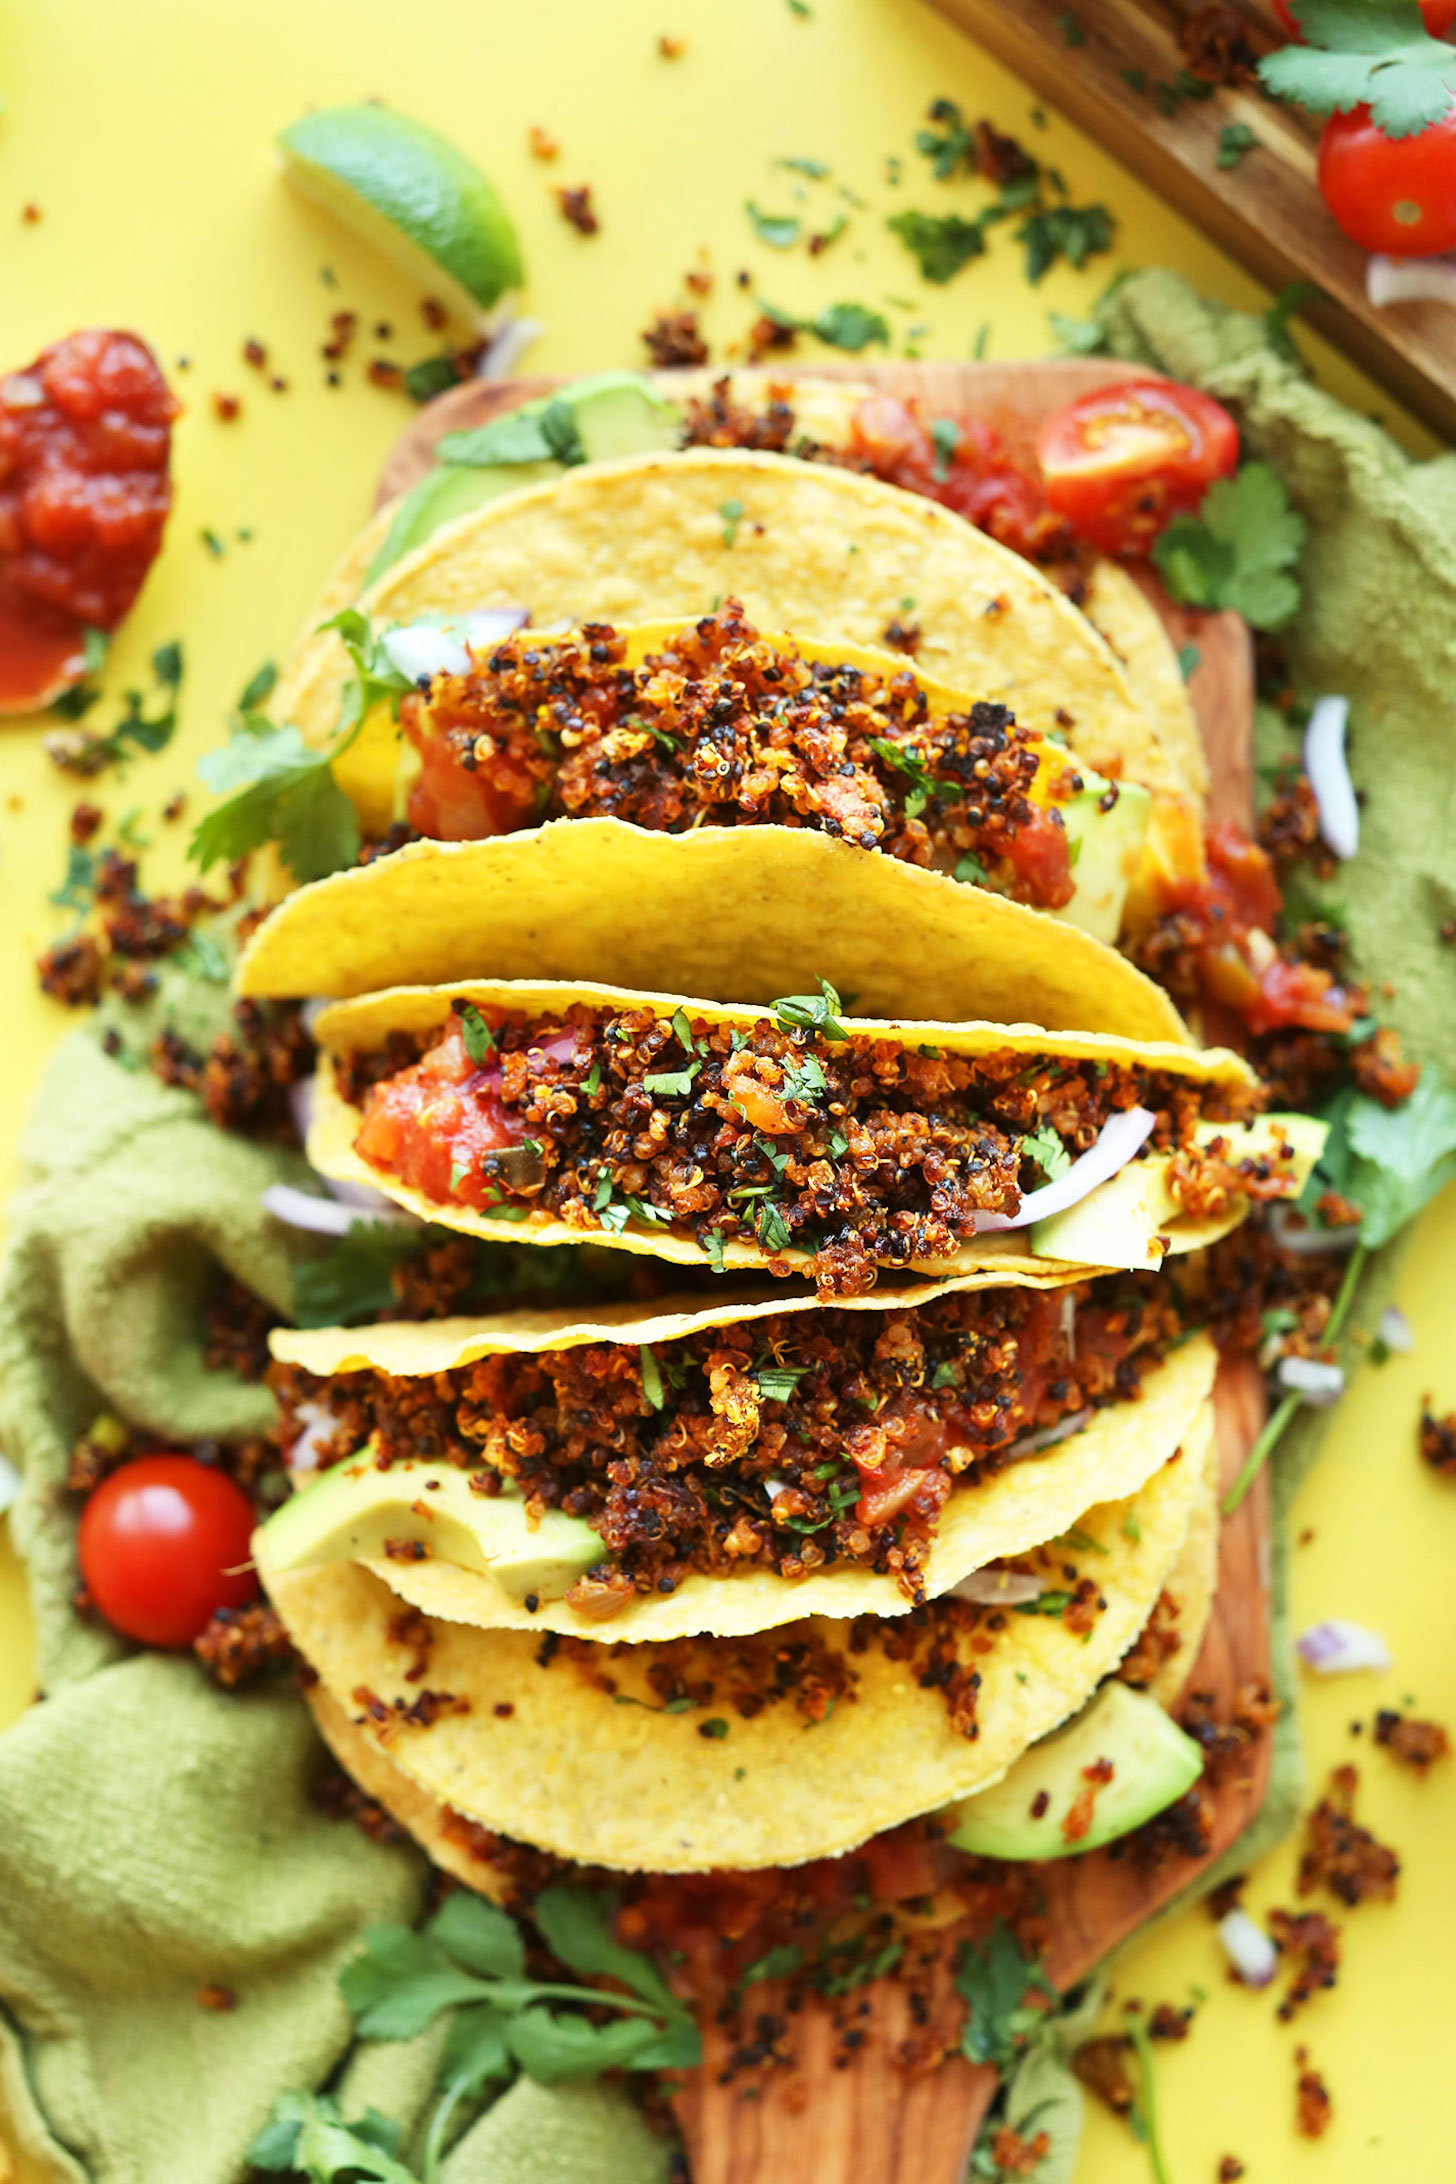 https://minimalistbaker.com/wp-content/uploads/2016/05/AMAZING-EASY-Quinoa-Taco-22Meat22-thats-crispy-flavorful-and-protein-packed-9-ingredients-SO-EASY-healthy-vegan-glutenfree-quinoa-tacos-mexican-recipe-1.jpg